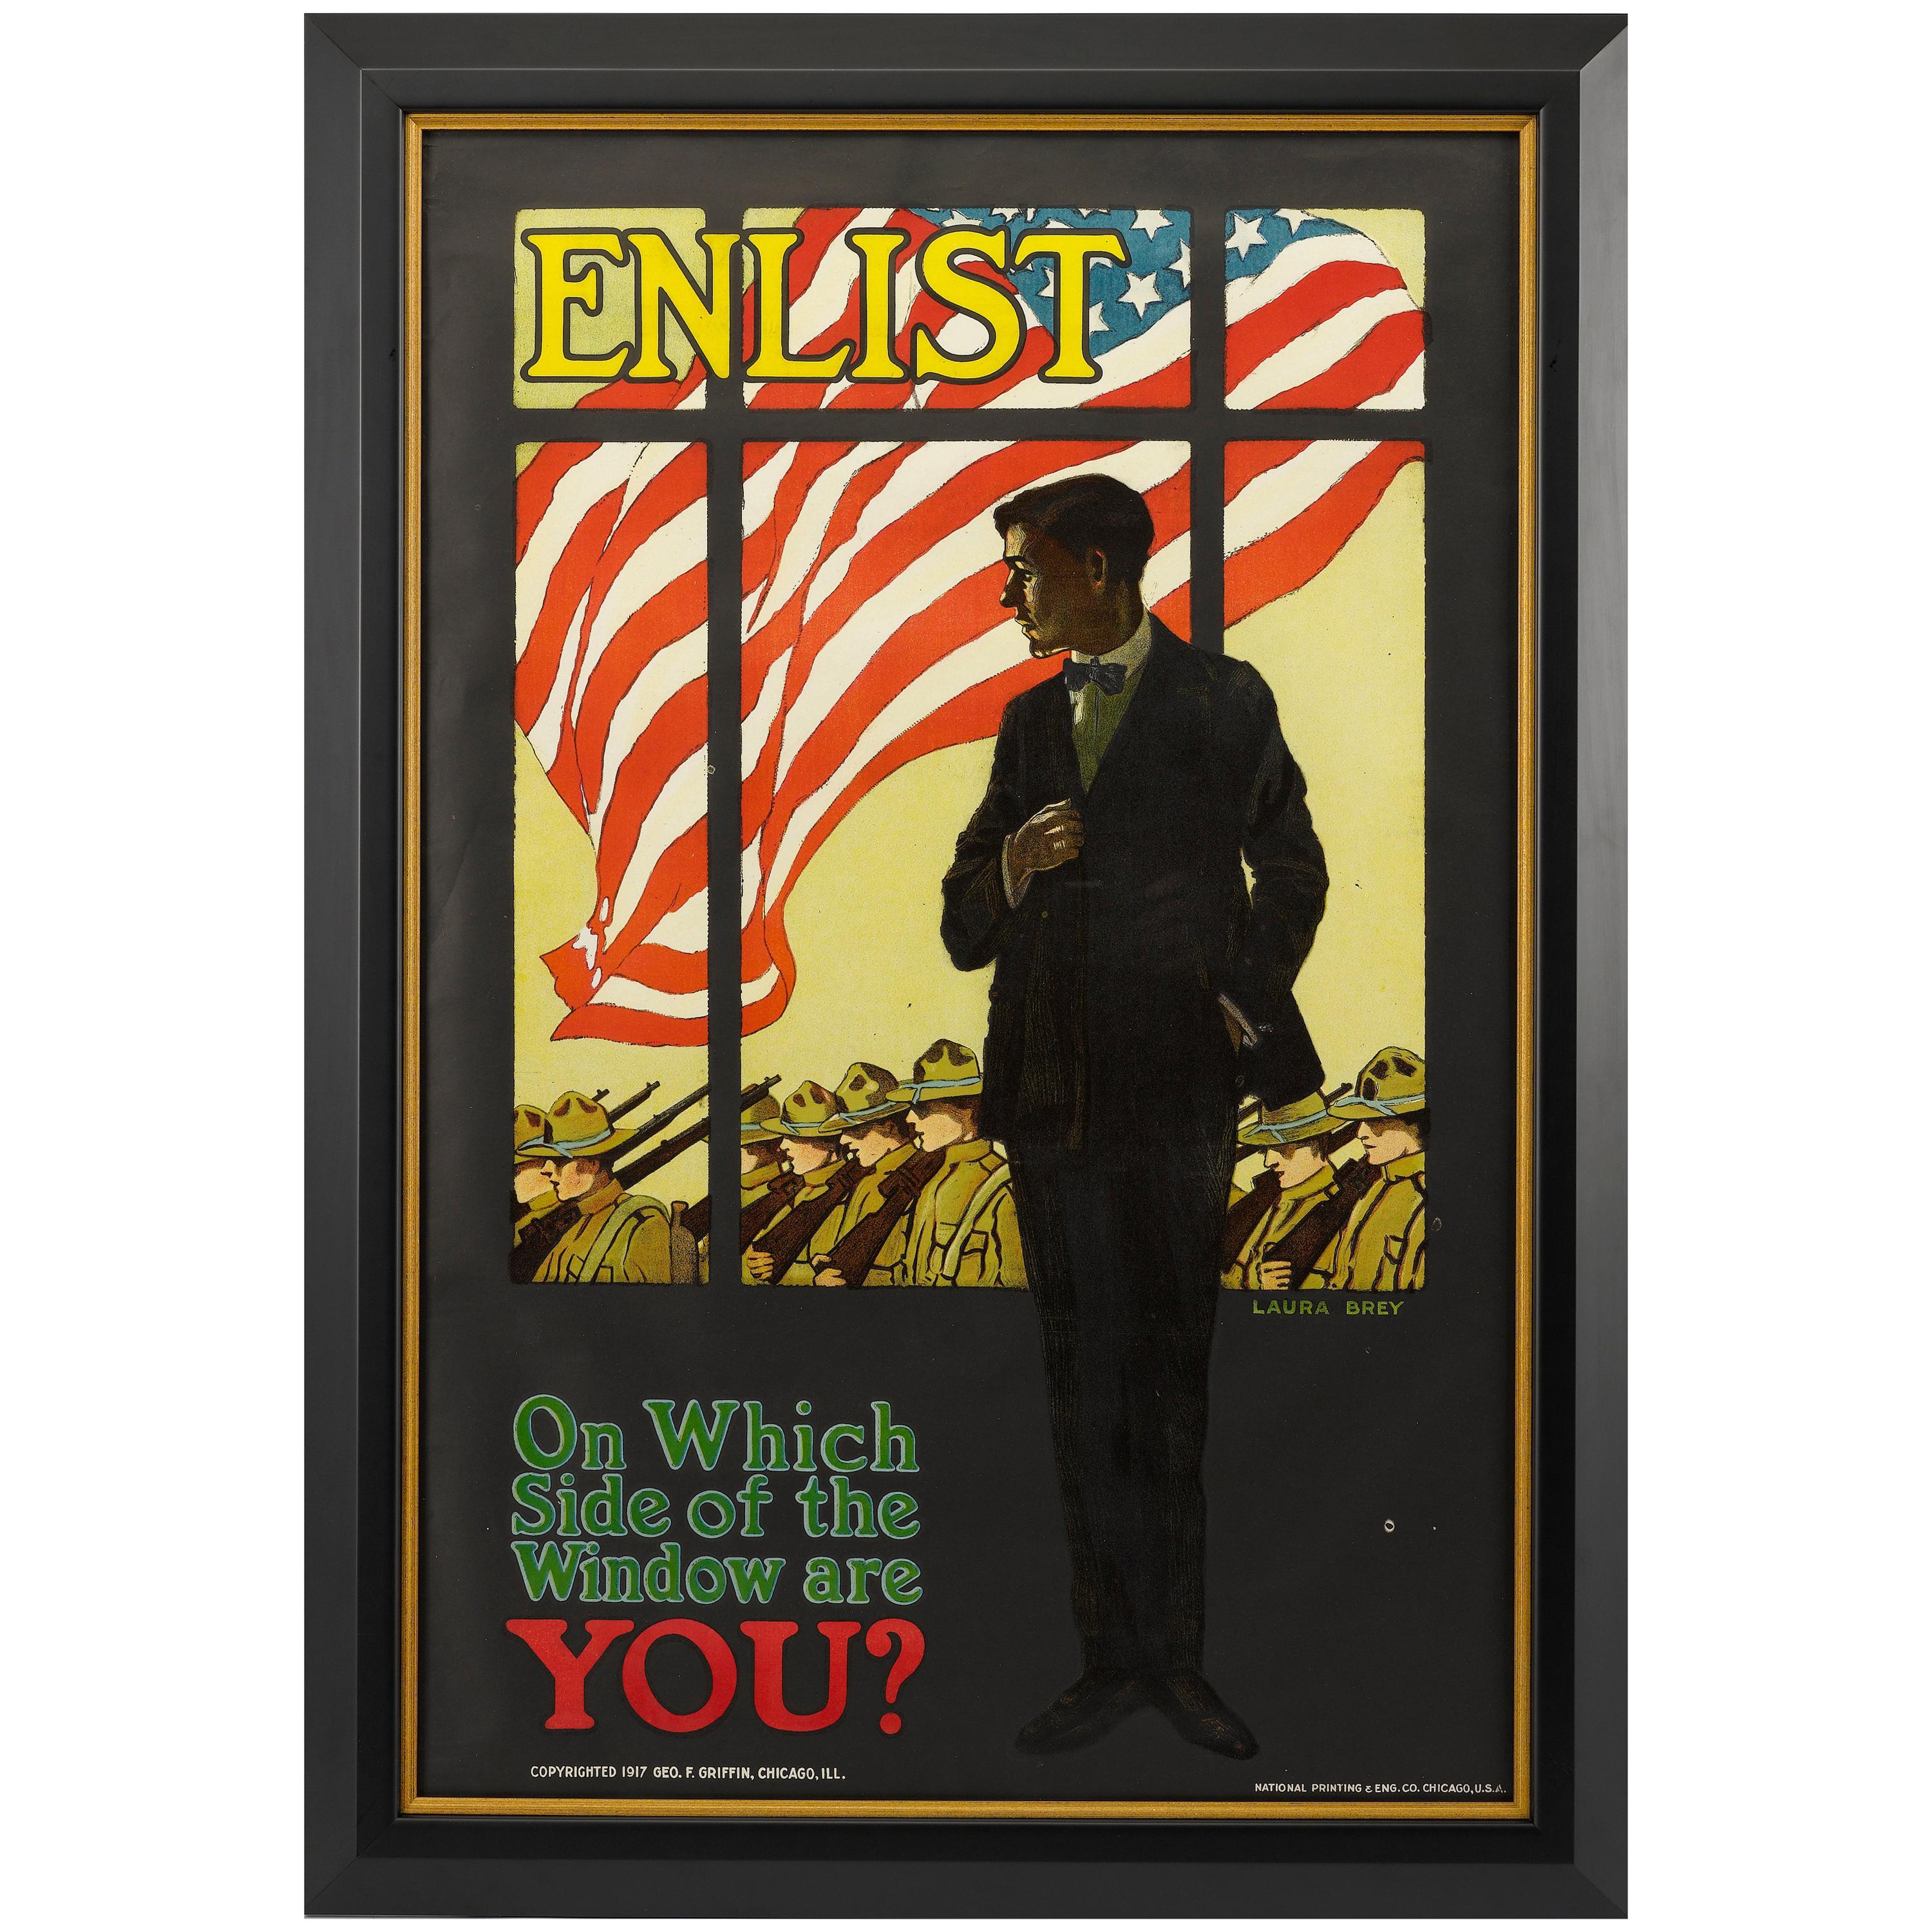 Enlist "On Which Side of the Window are You?" Vintage WWI Poster, 1917